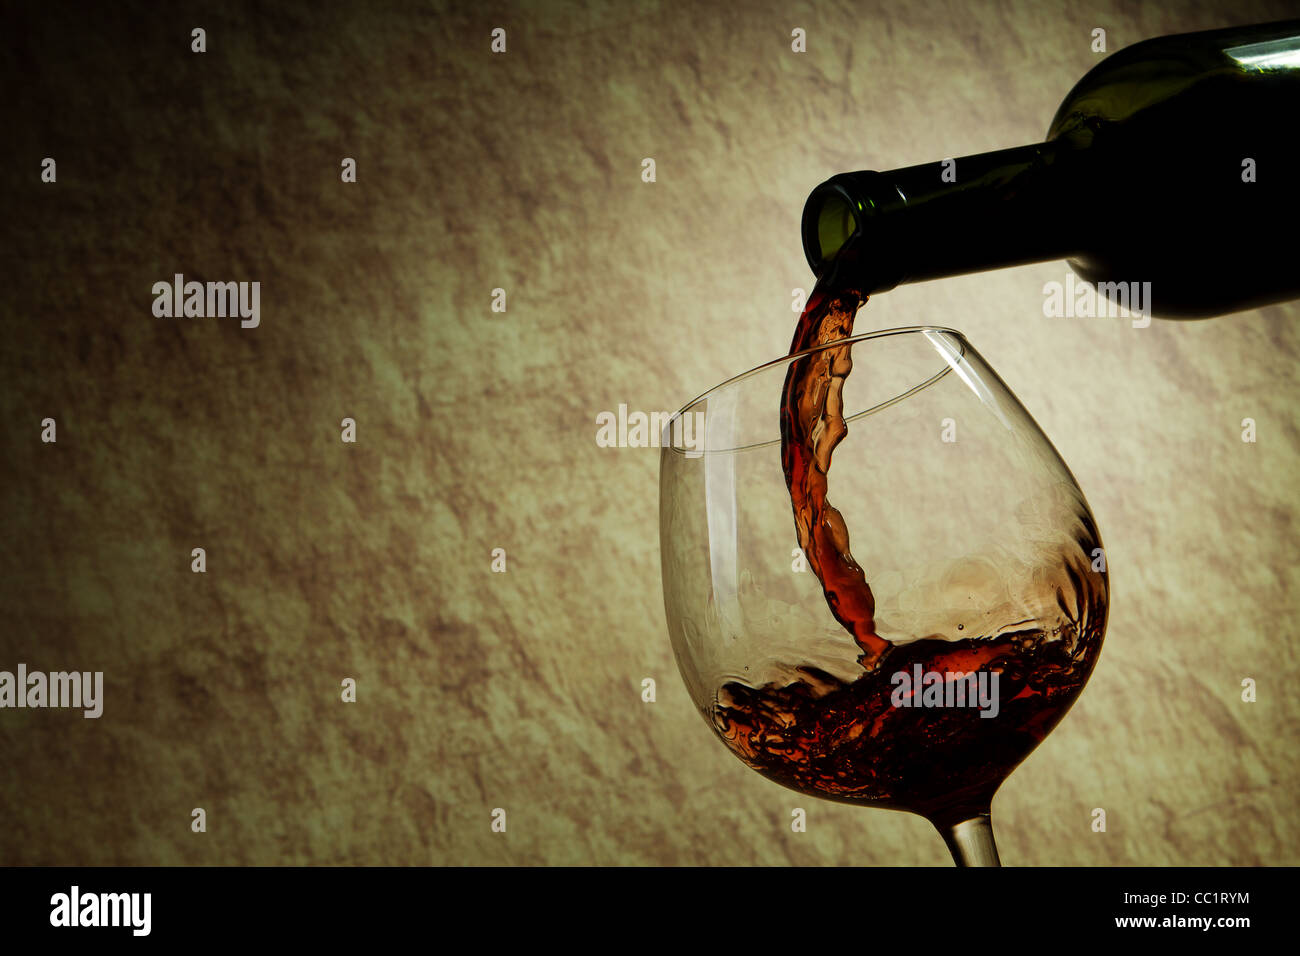 Red Wine glass and Bottle on a old stone Stock Photo